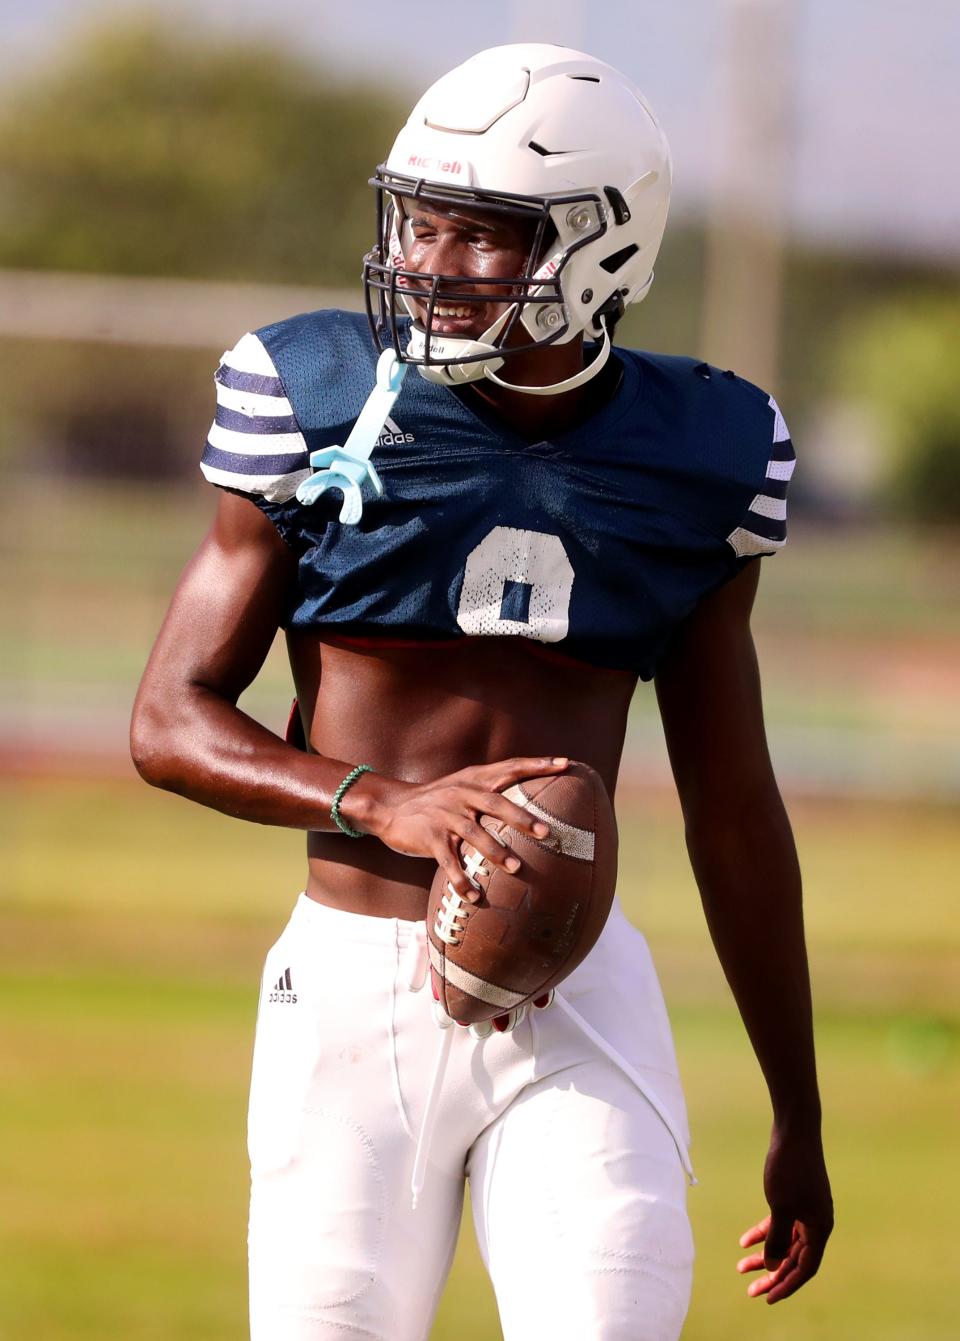 Siegel 4-star cornerback Tarrion Grant committed to Purdue Sunday.